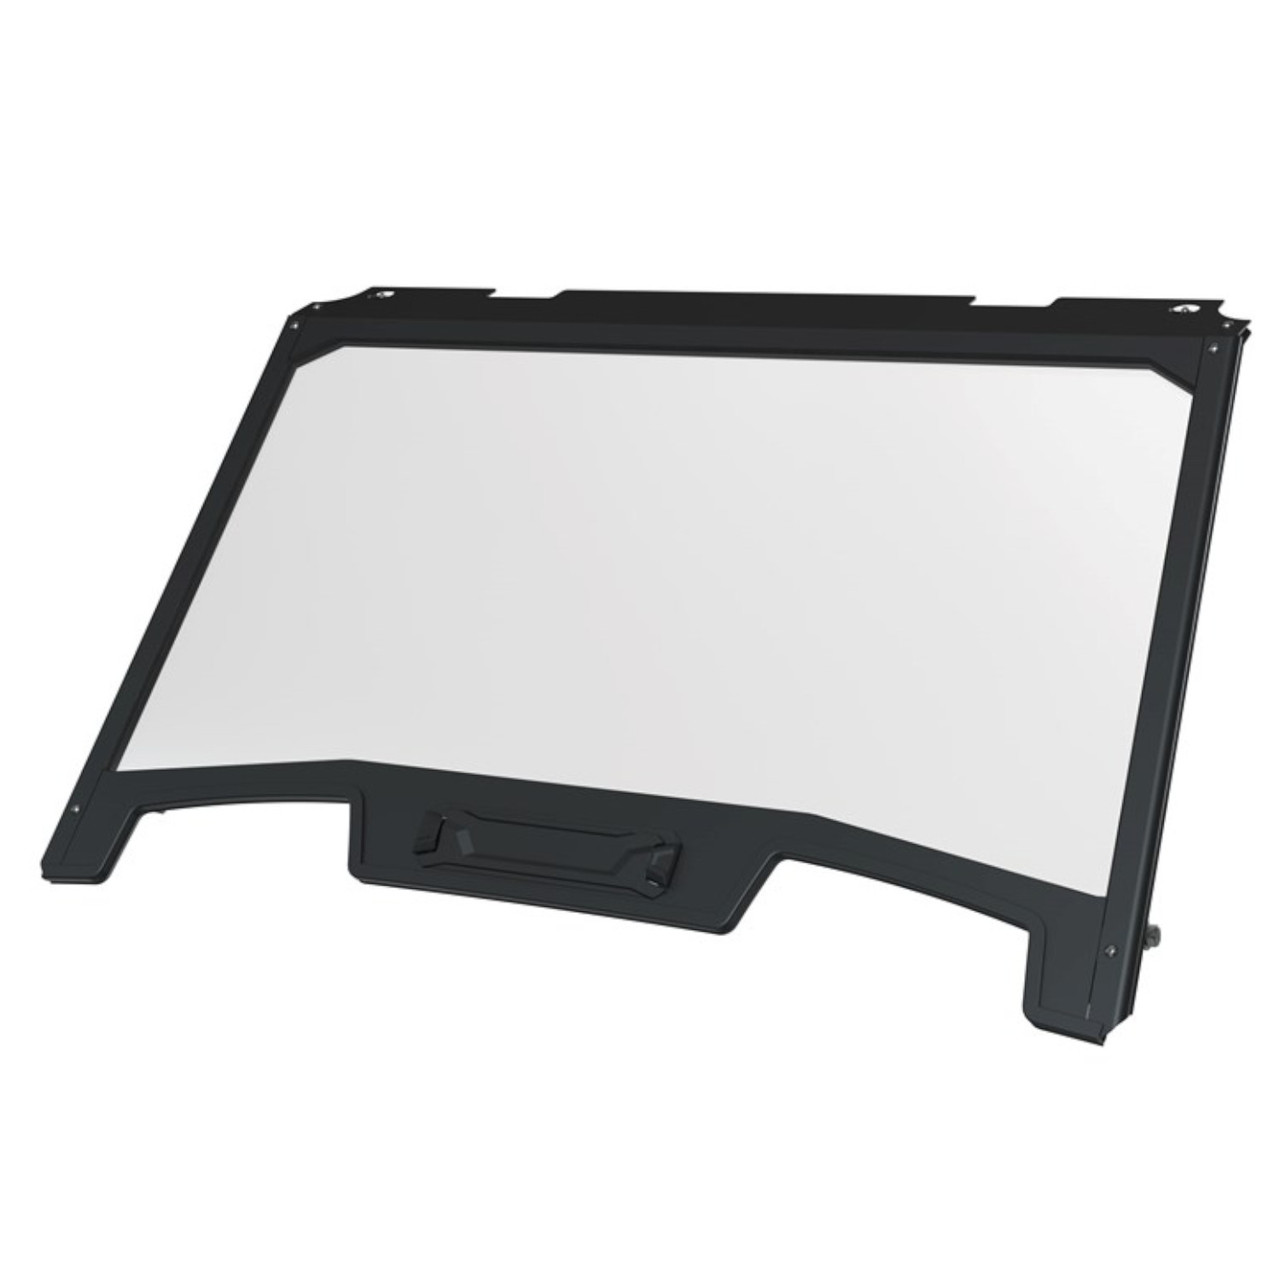 Polaris New OEM, Full Vented Windshield, Tempered Glass, 2884756